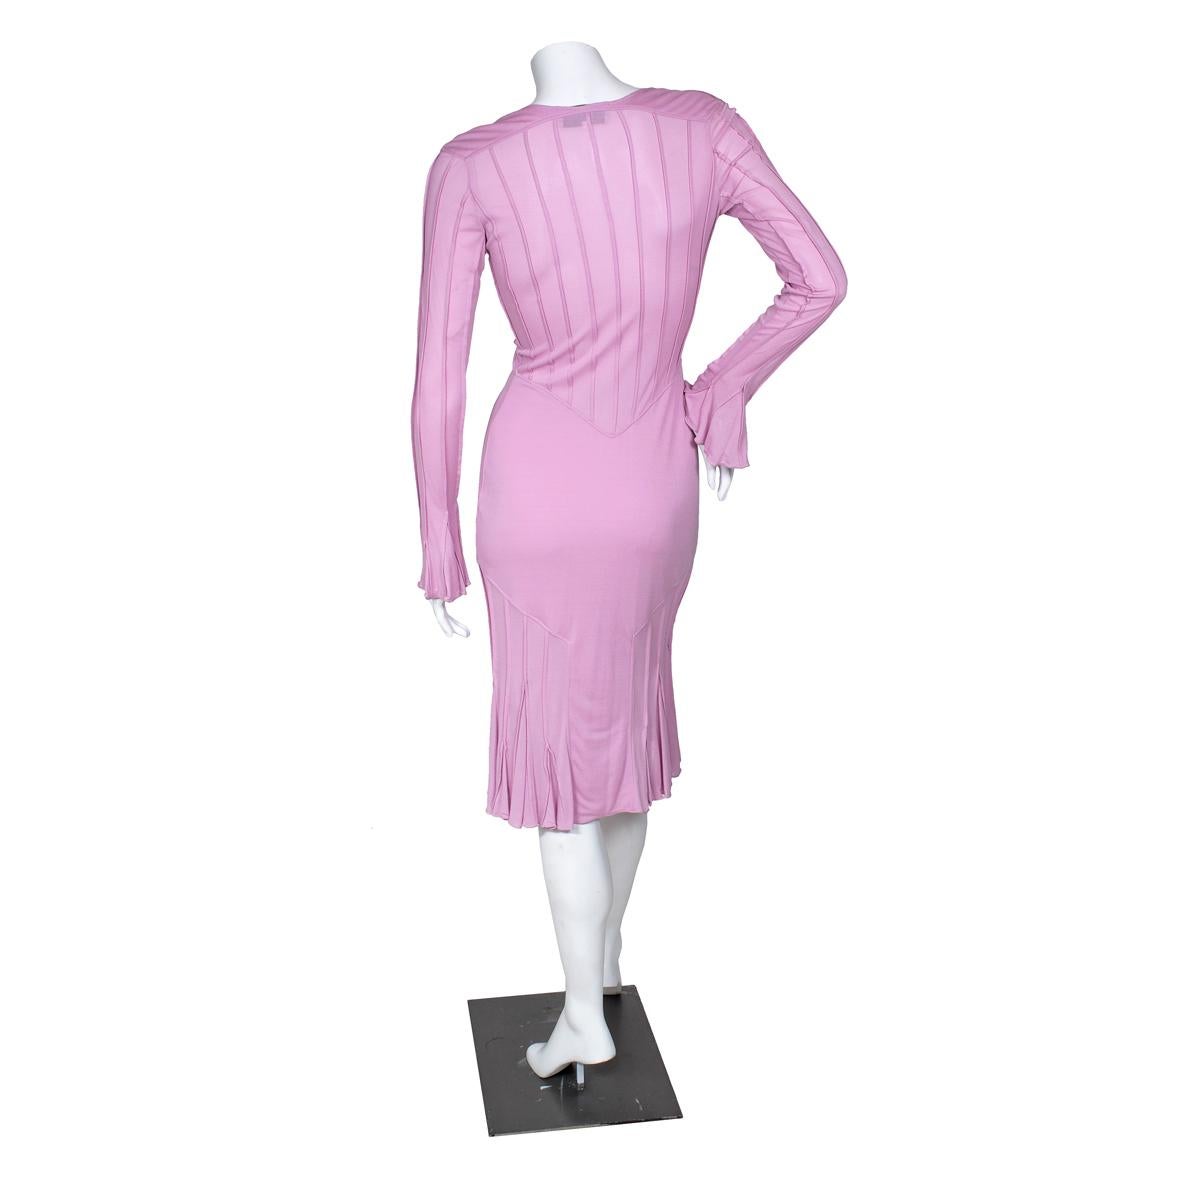 Dress by Tom Ford for Yves Saint Laurent, early 2000s
Vertical body contouring seaming
Scoop neck
Stretch viscose material in a rose pink shade
Condition: Great, with minor wear to fabric

Size/Measurements:
Size medium
36